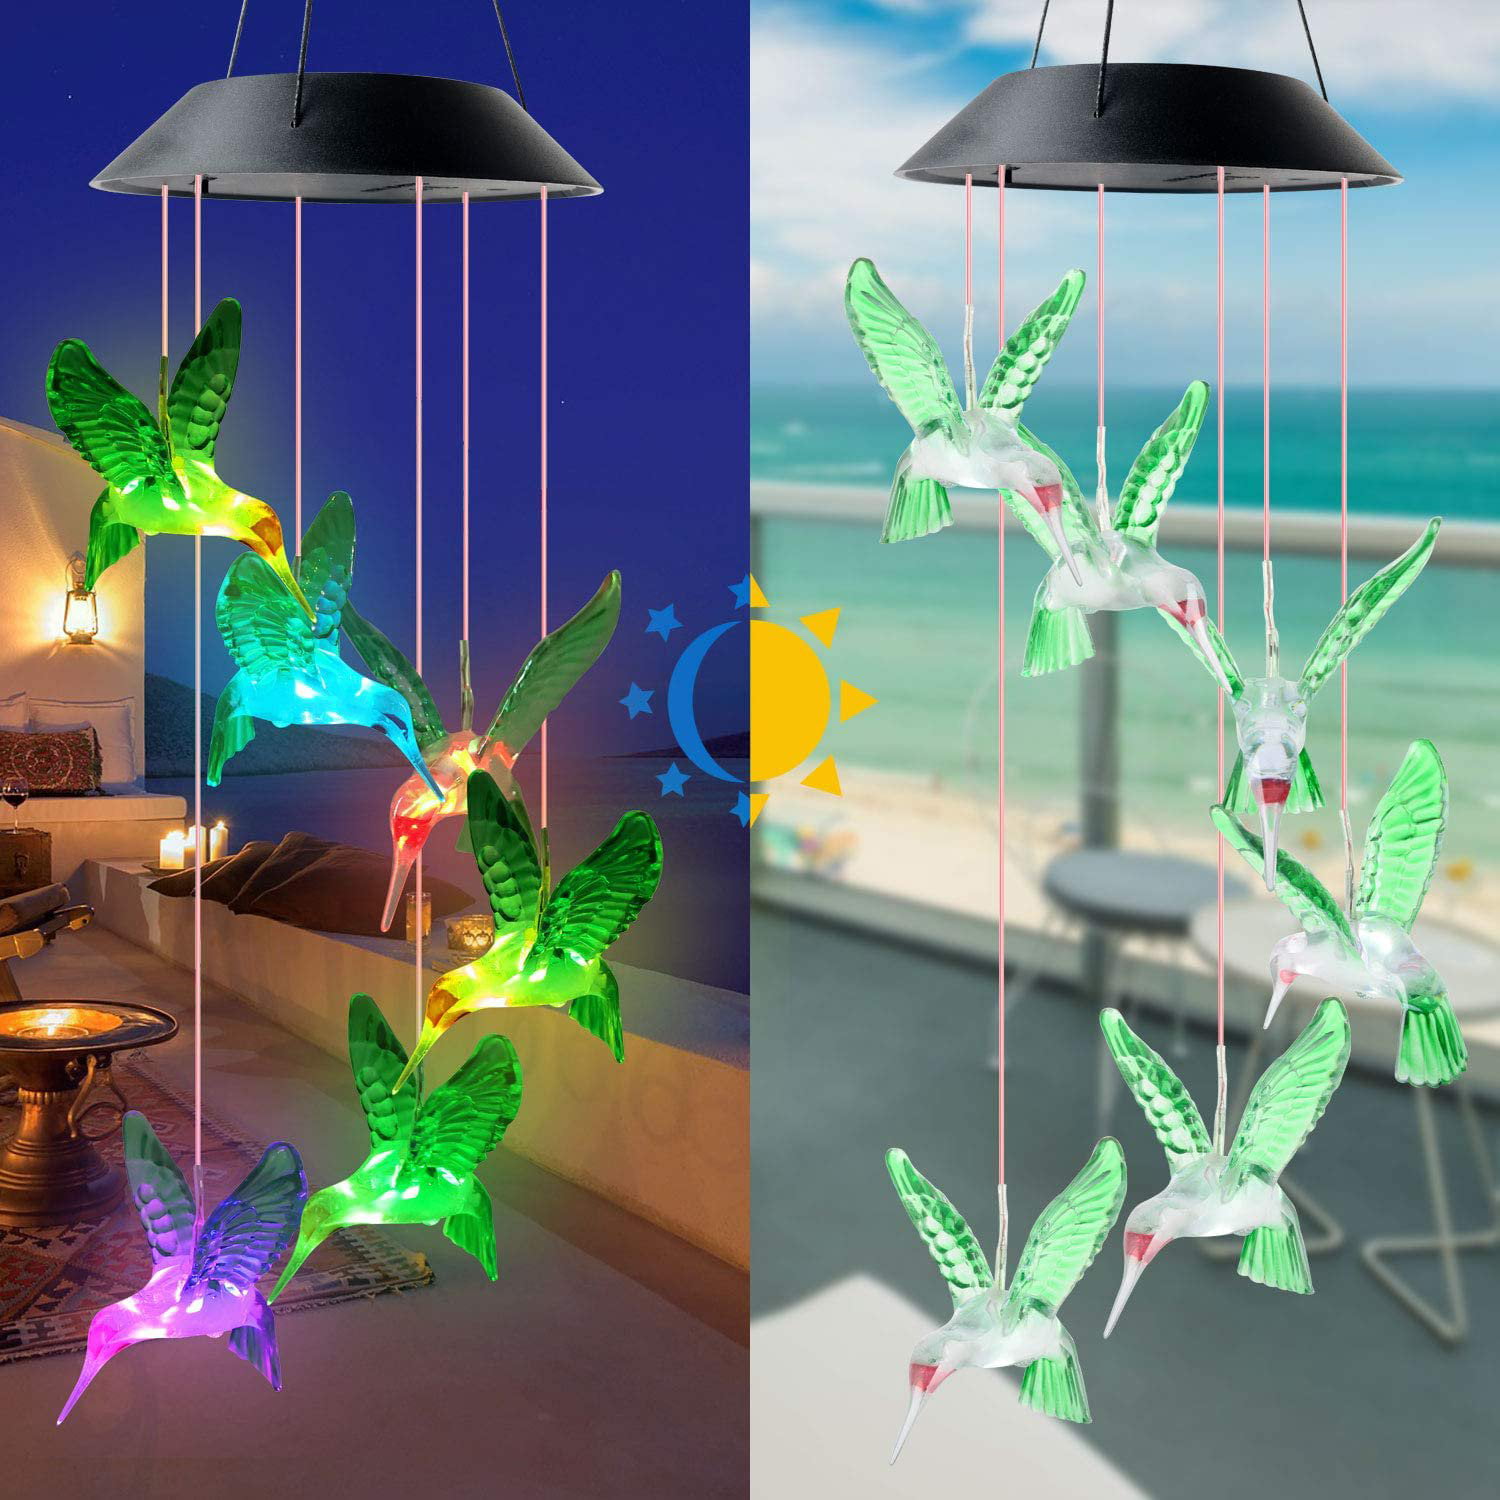 Solar Hummingbird Butterfly Wind Chimes Party Decor Color Changing Outdoor  Waterproof Mobile Hanging Pendant Lights For Porch Patio Yard Garden  Decorations From Jessie06, $8.65